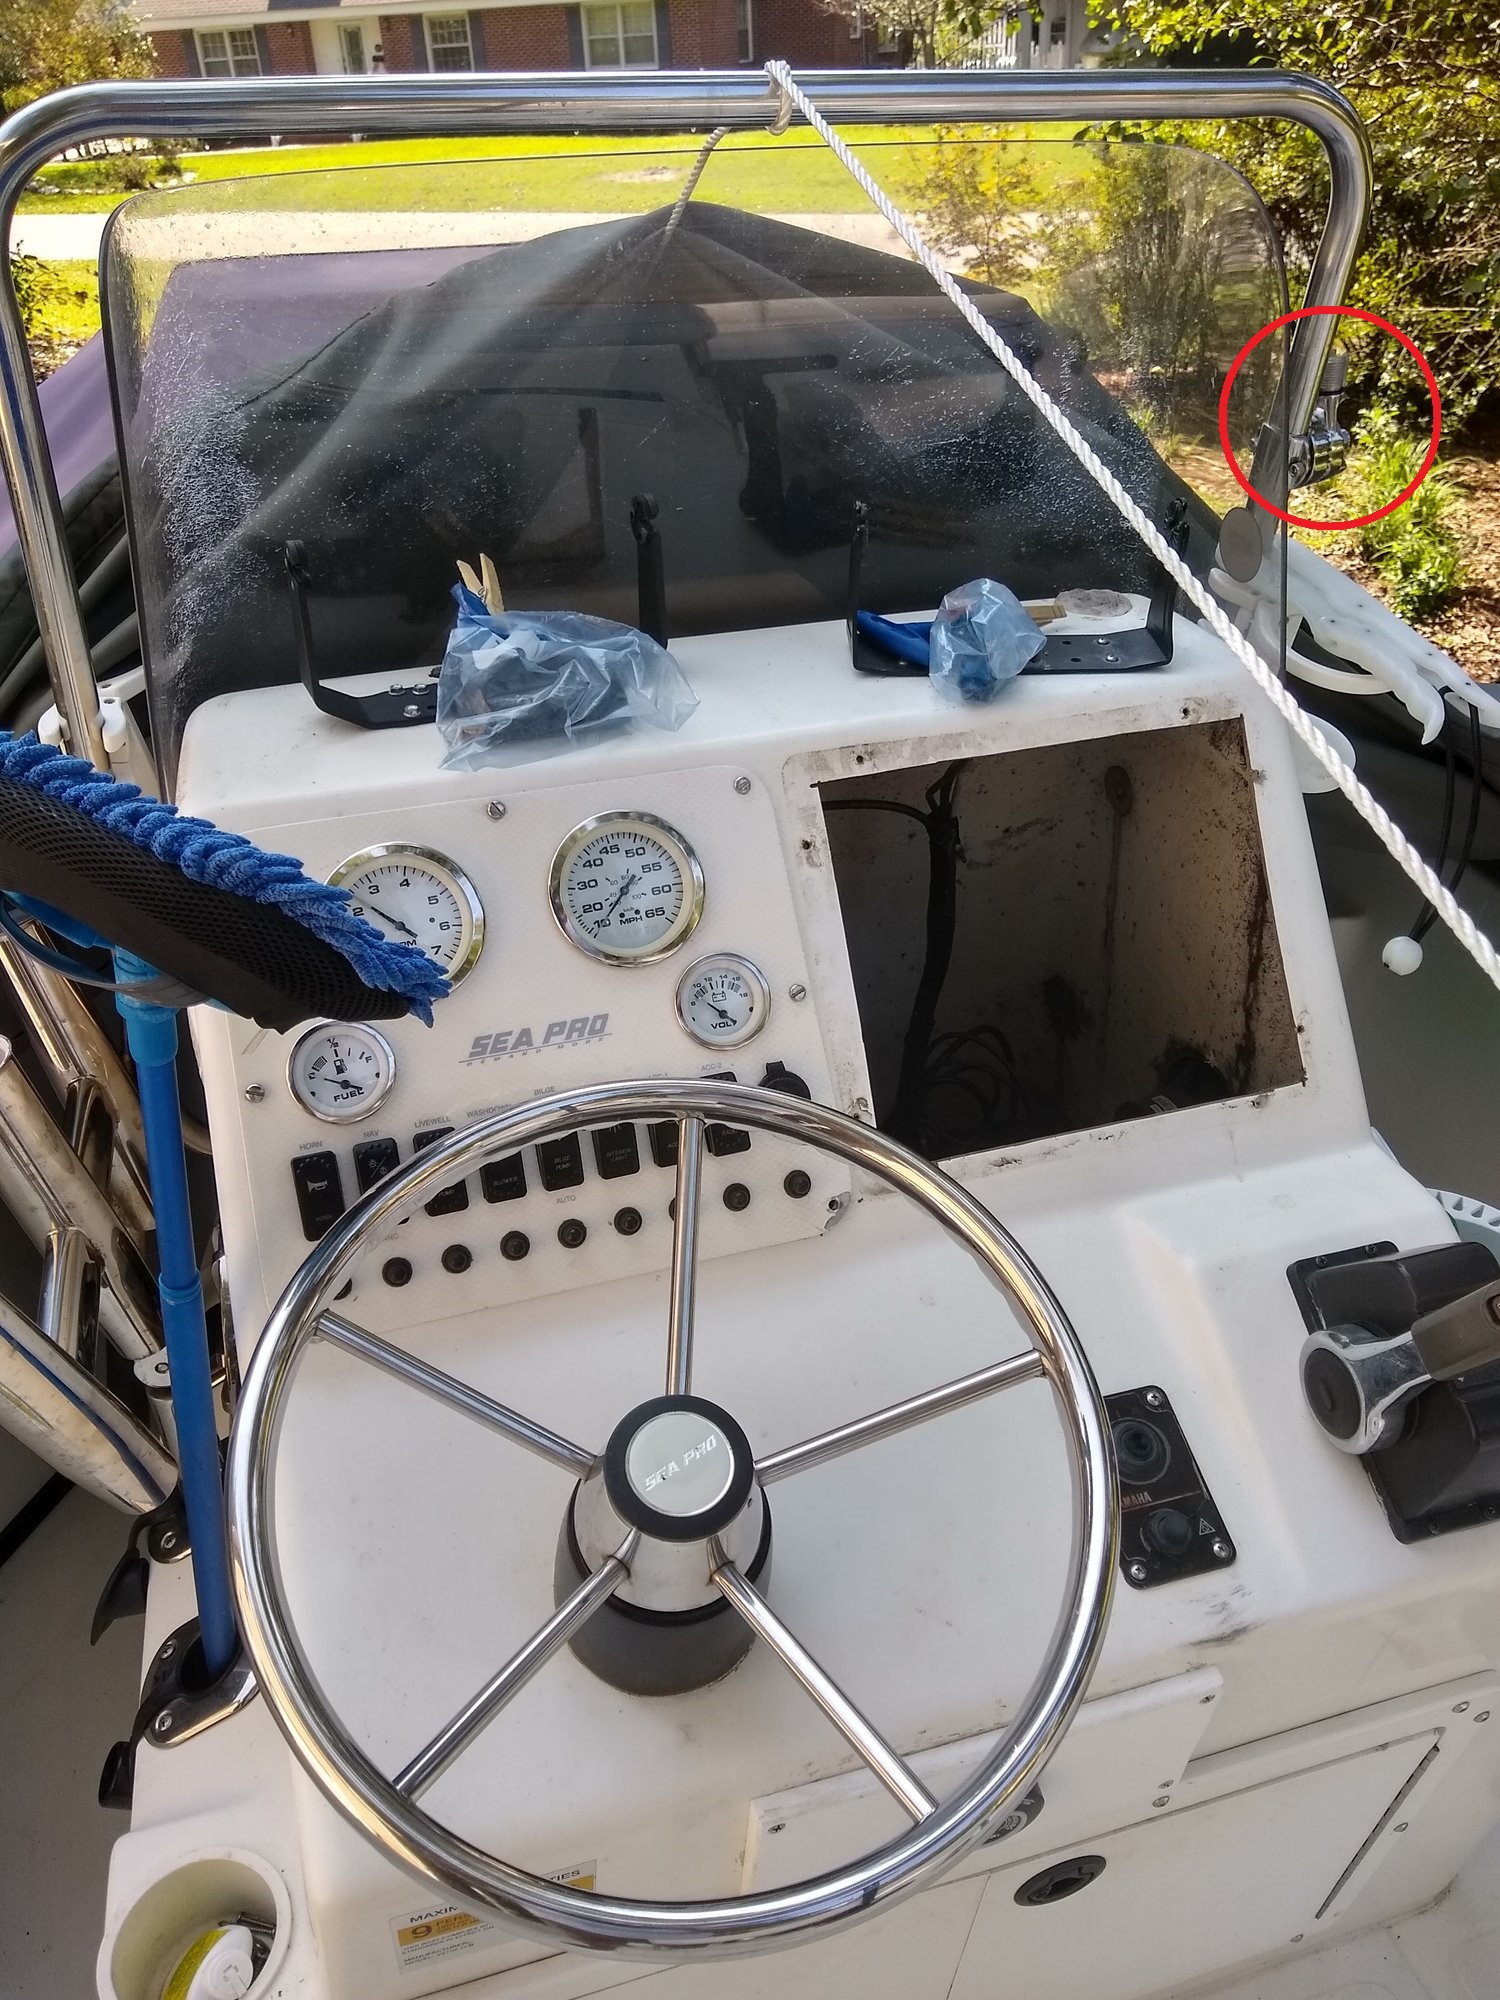 Mounting vhf radio to 1 grab rail - Page 2 - The Hull Truth - Boating and Fishing  Forum